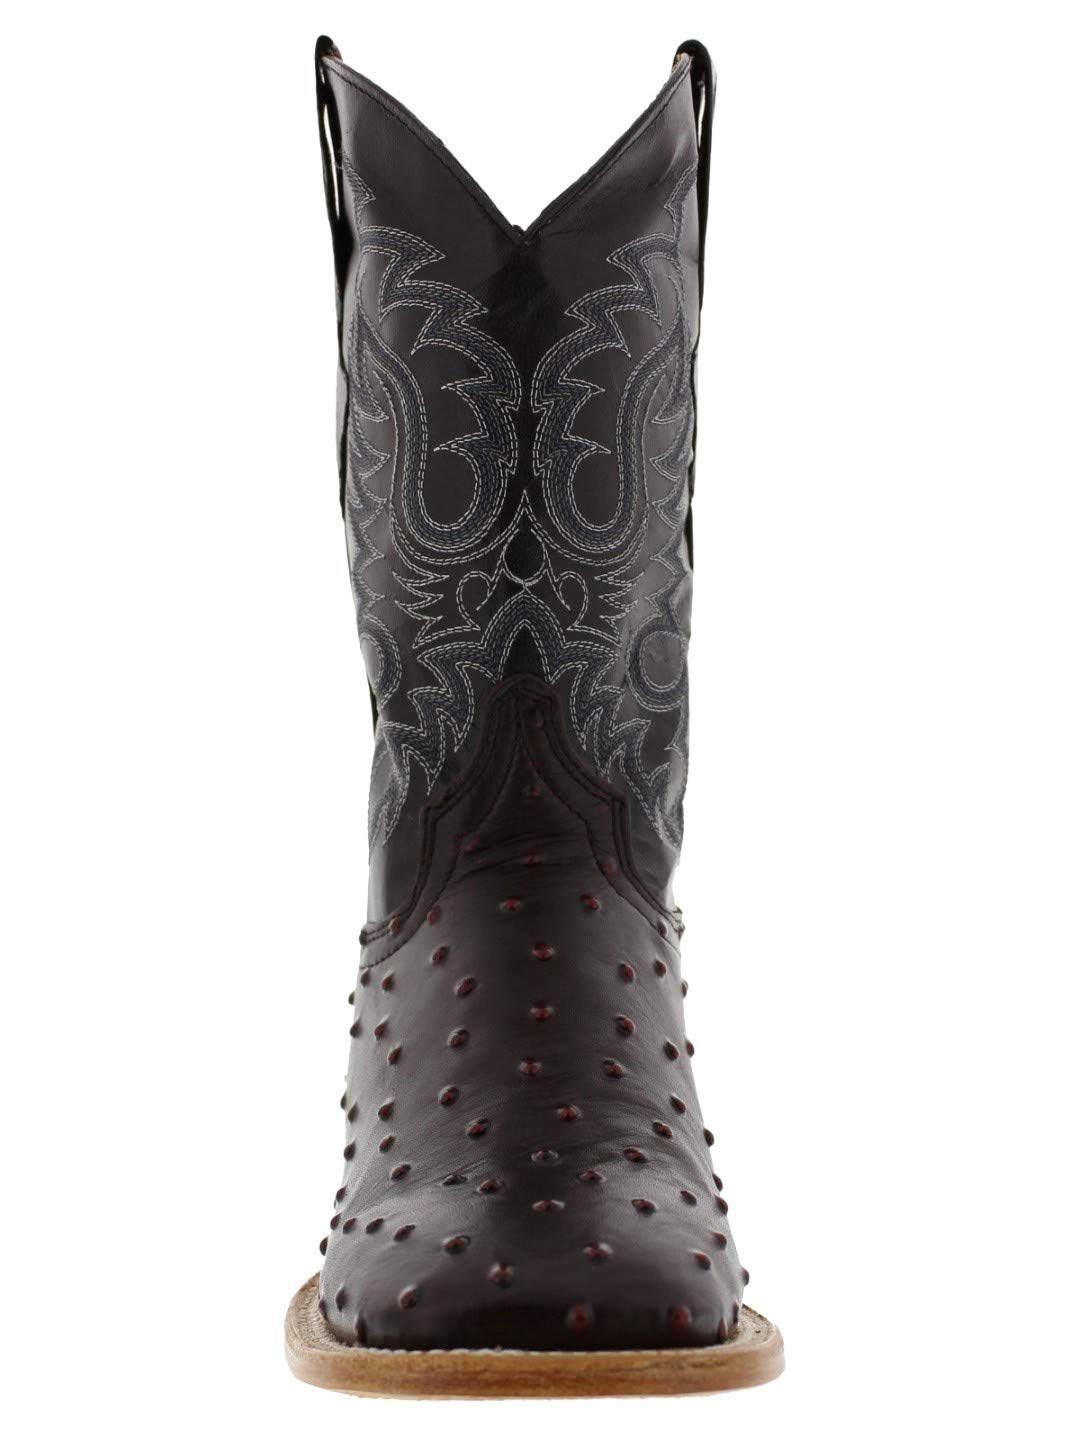 Texas Legacy Mens Black Cherry Western Leather Cowboy Boots Ostrich Quill Print